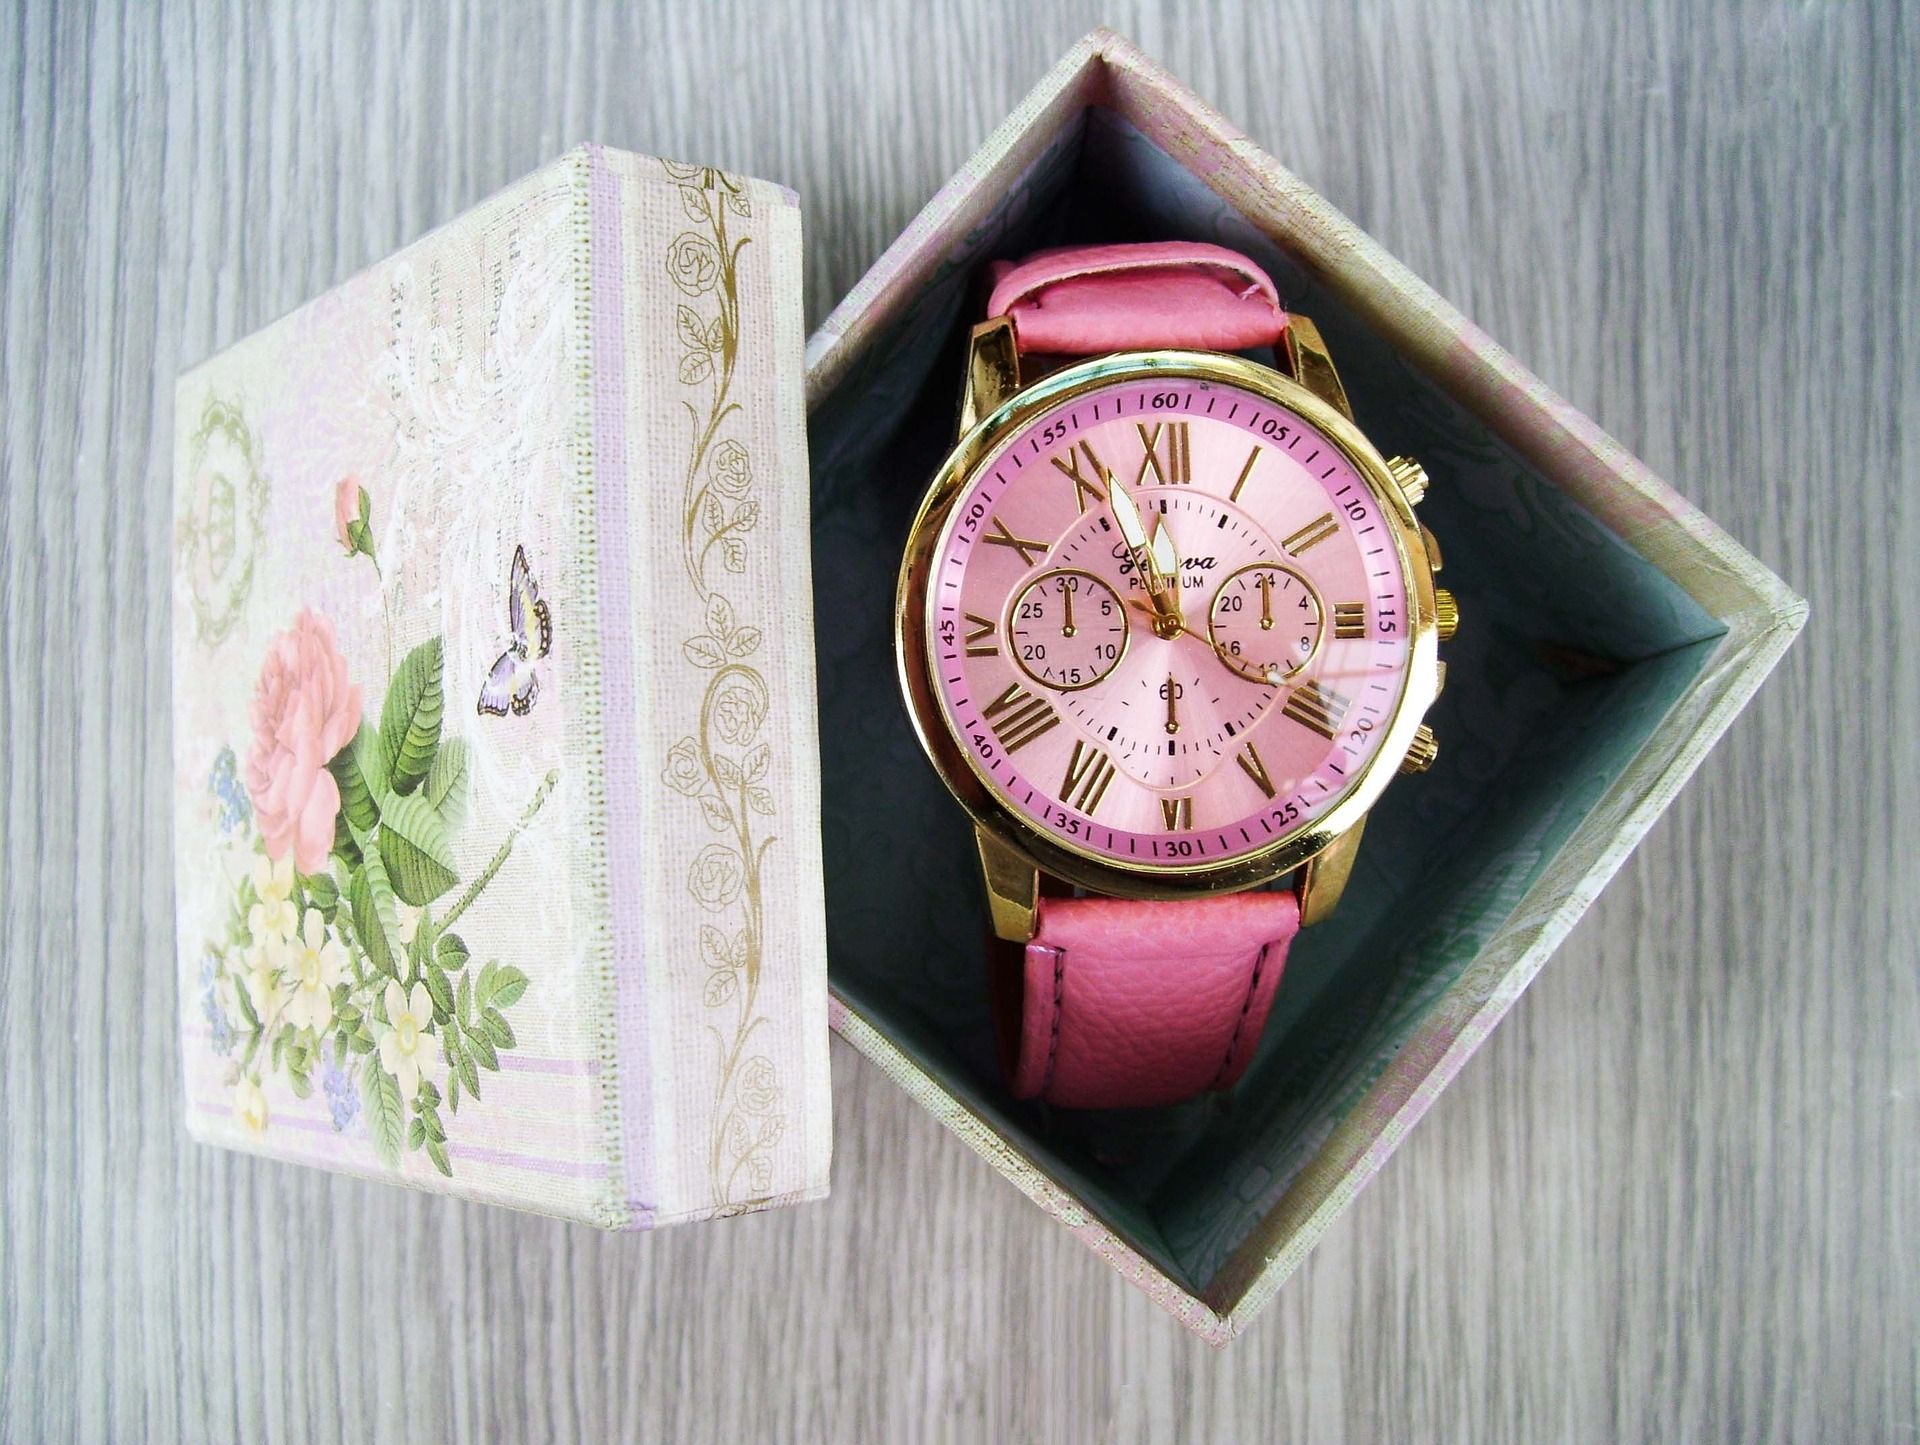 Small gift box with flowers and butterflies. The lid is set aside revealing a ladies pink and gold wrist watch.